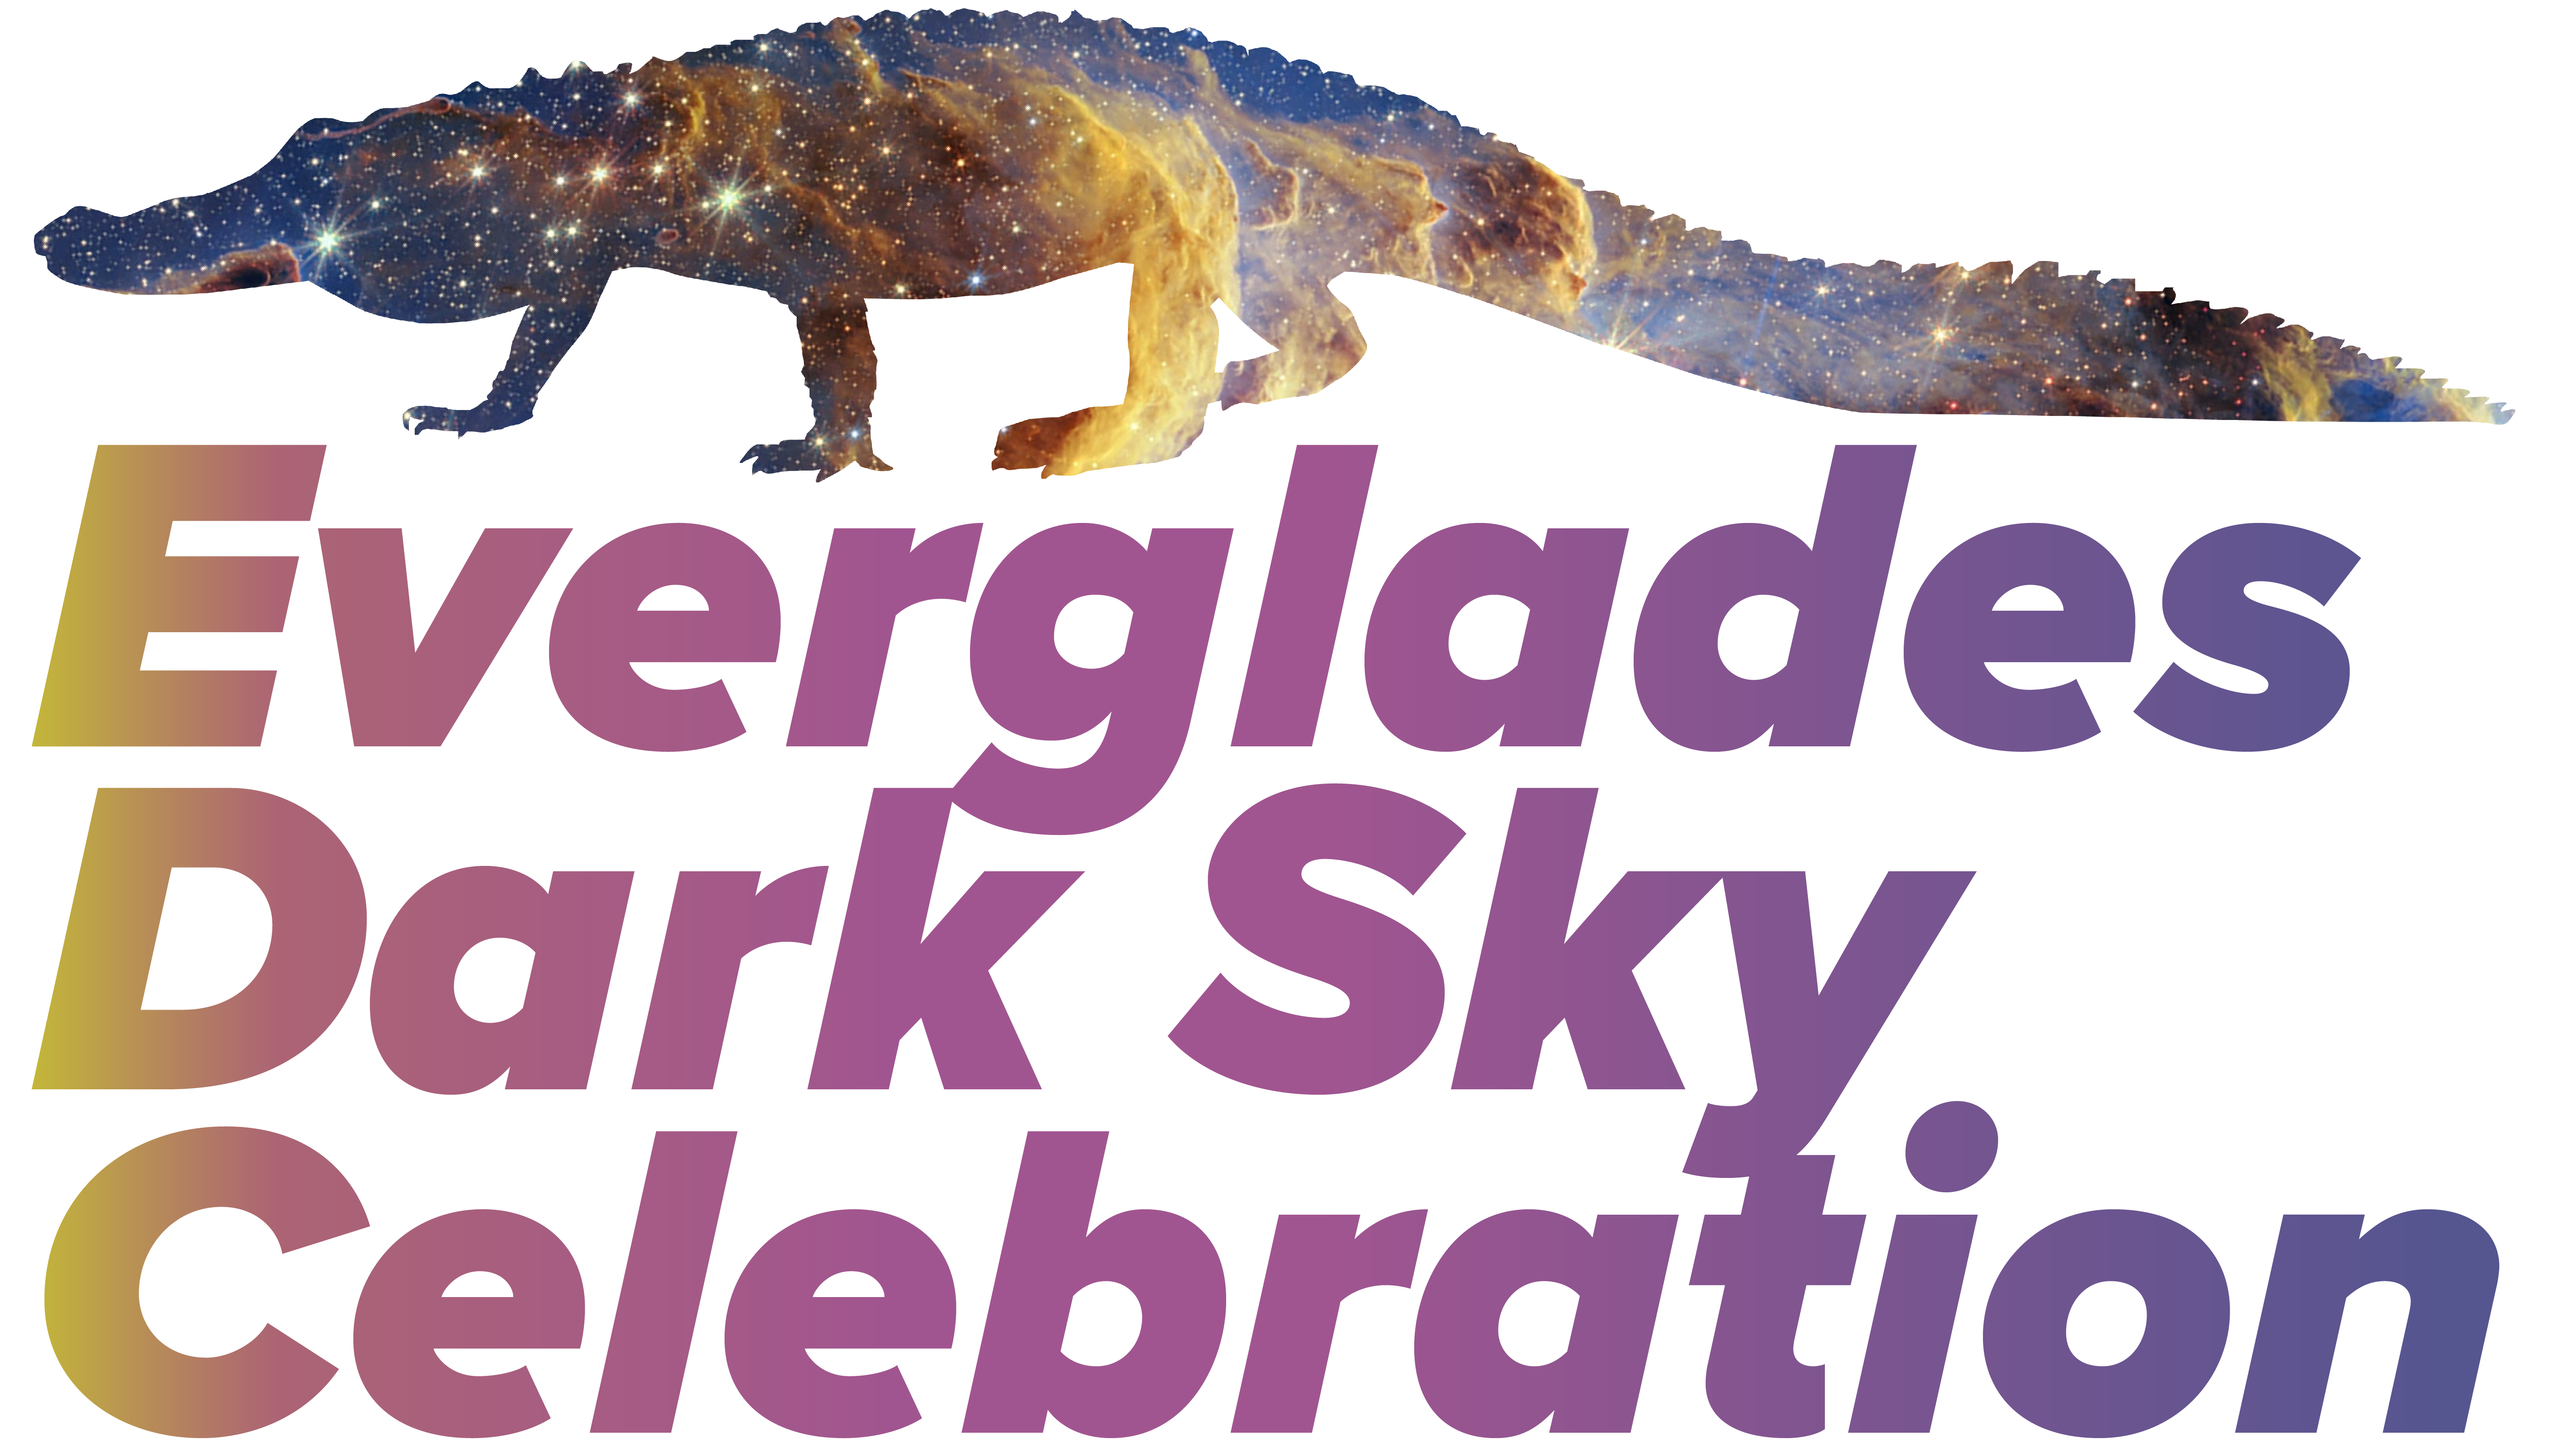 Stars within an alligator shape above the words "Everglades Dark Sky Month"